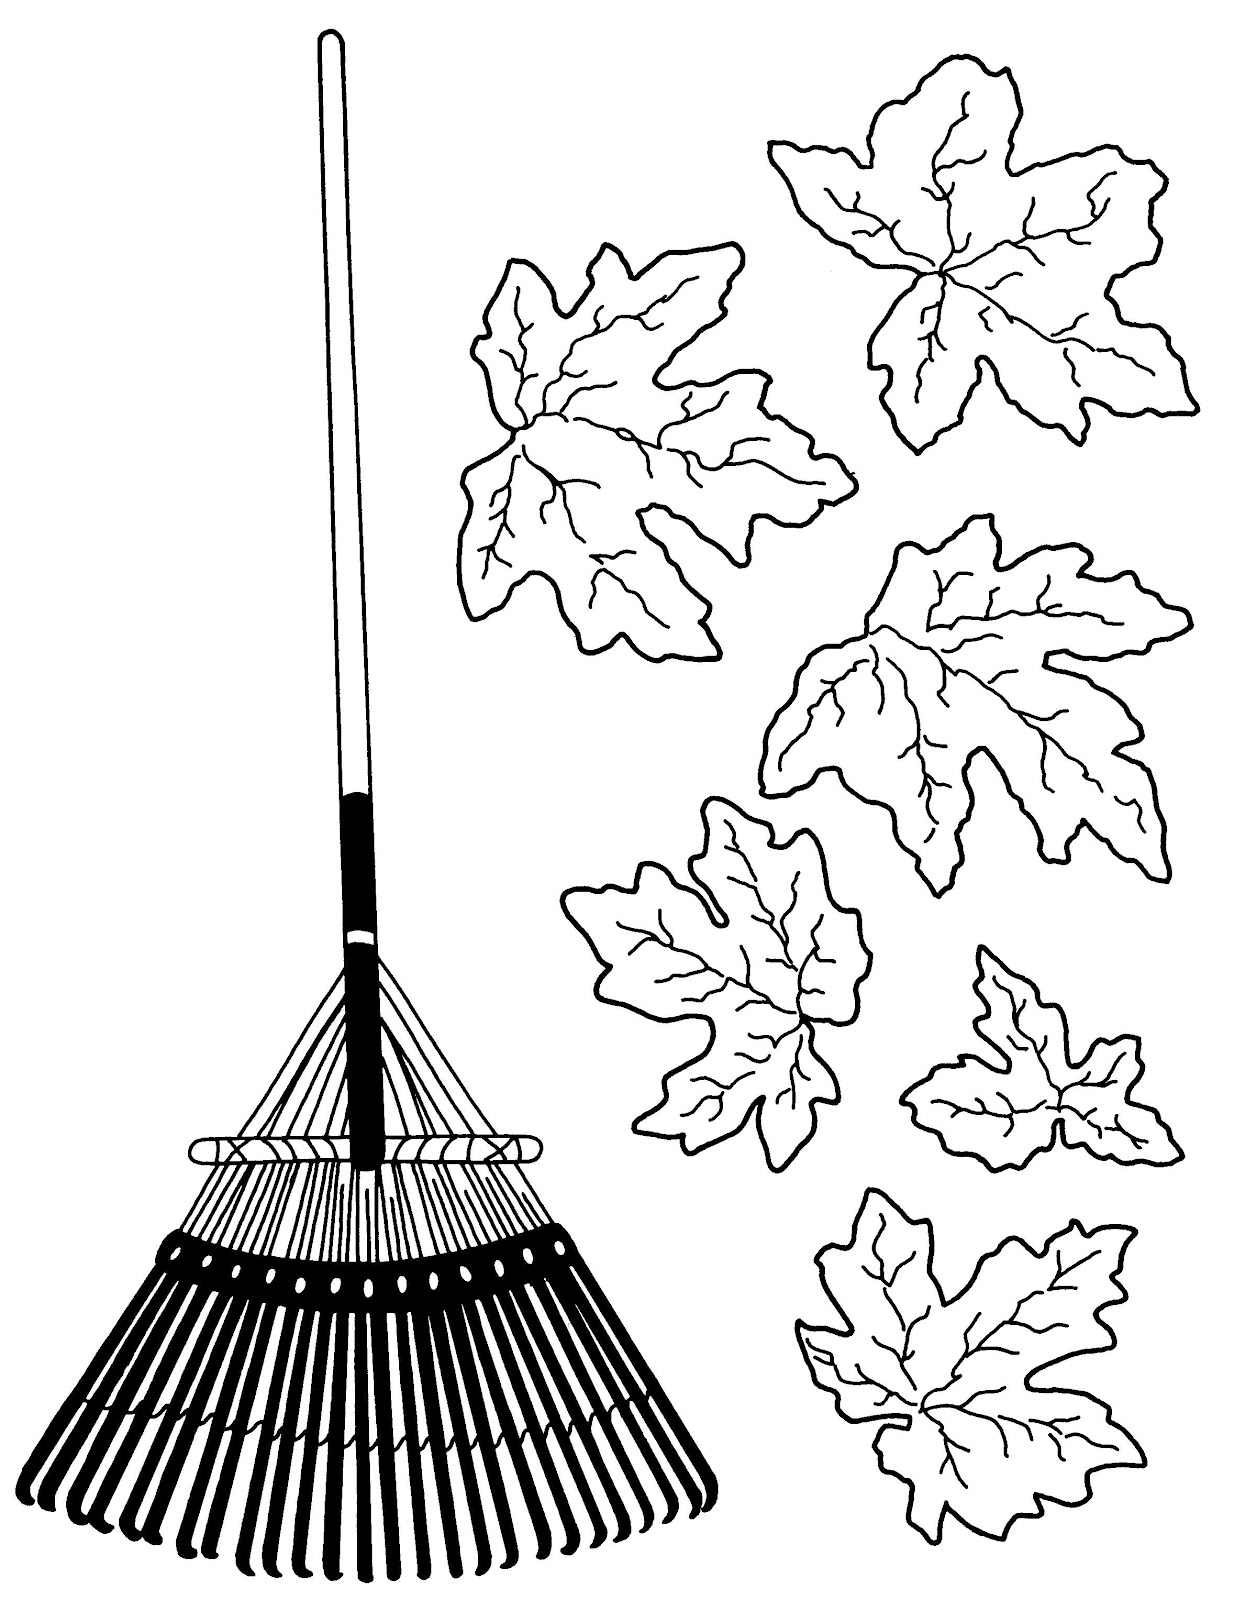 Picture Of Raking Leaves - Cliparts.co